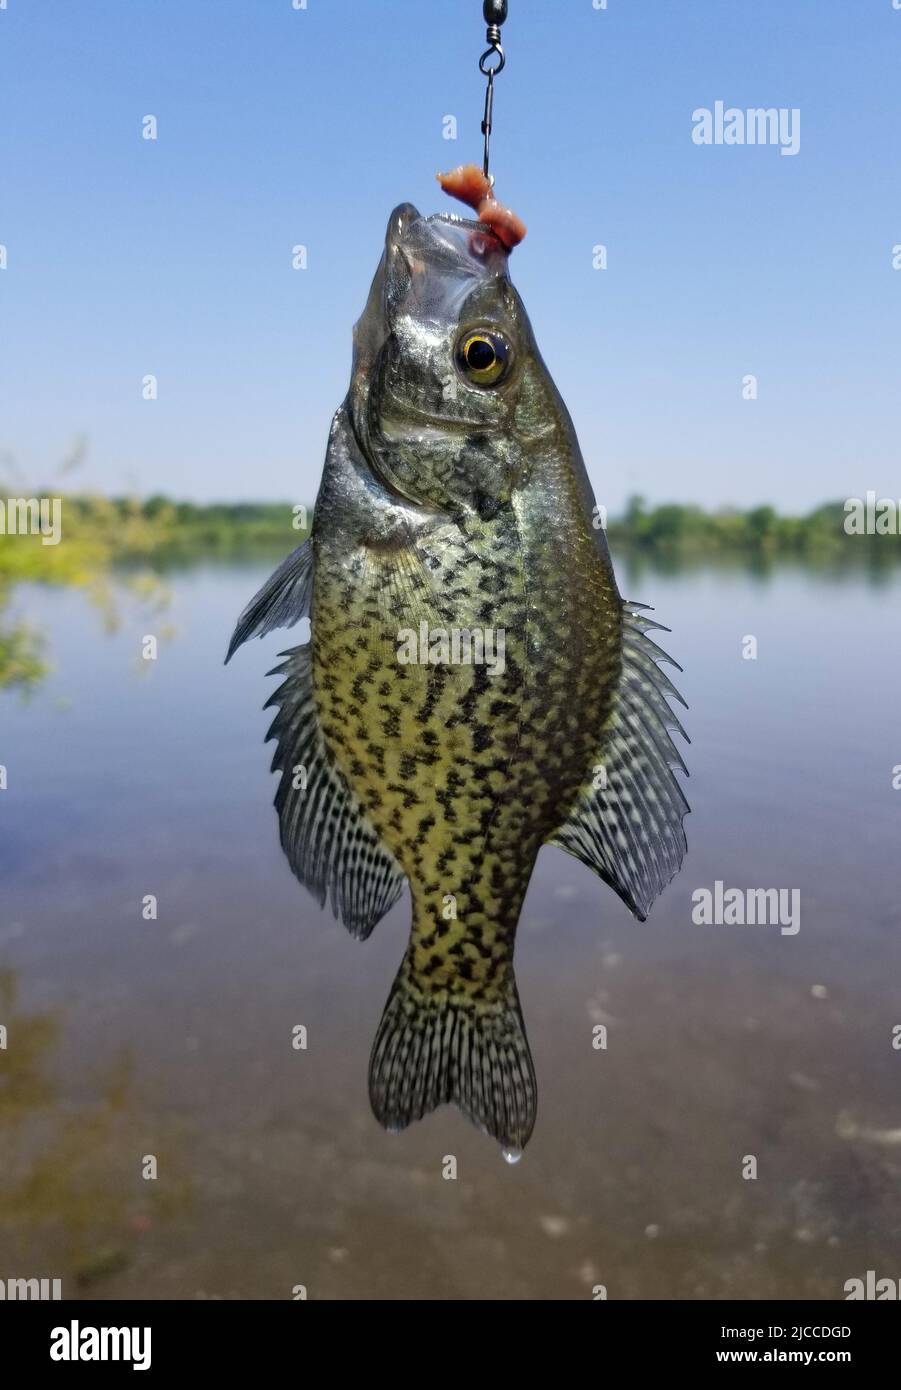 A beautiful crappie on a hook with worms Stock Photo